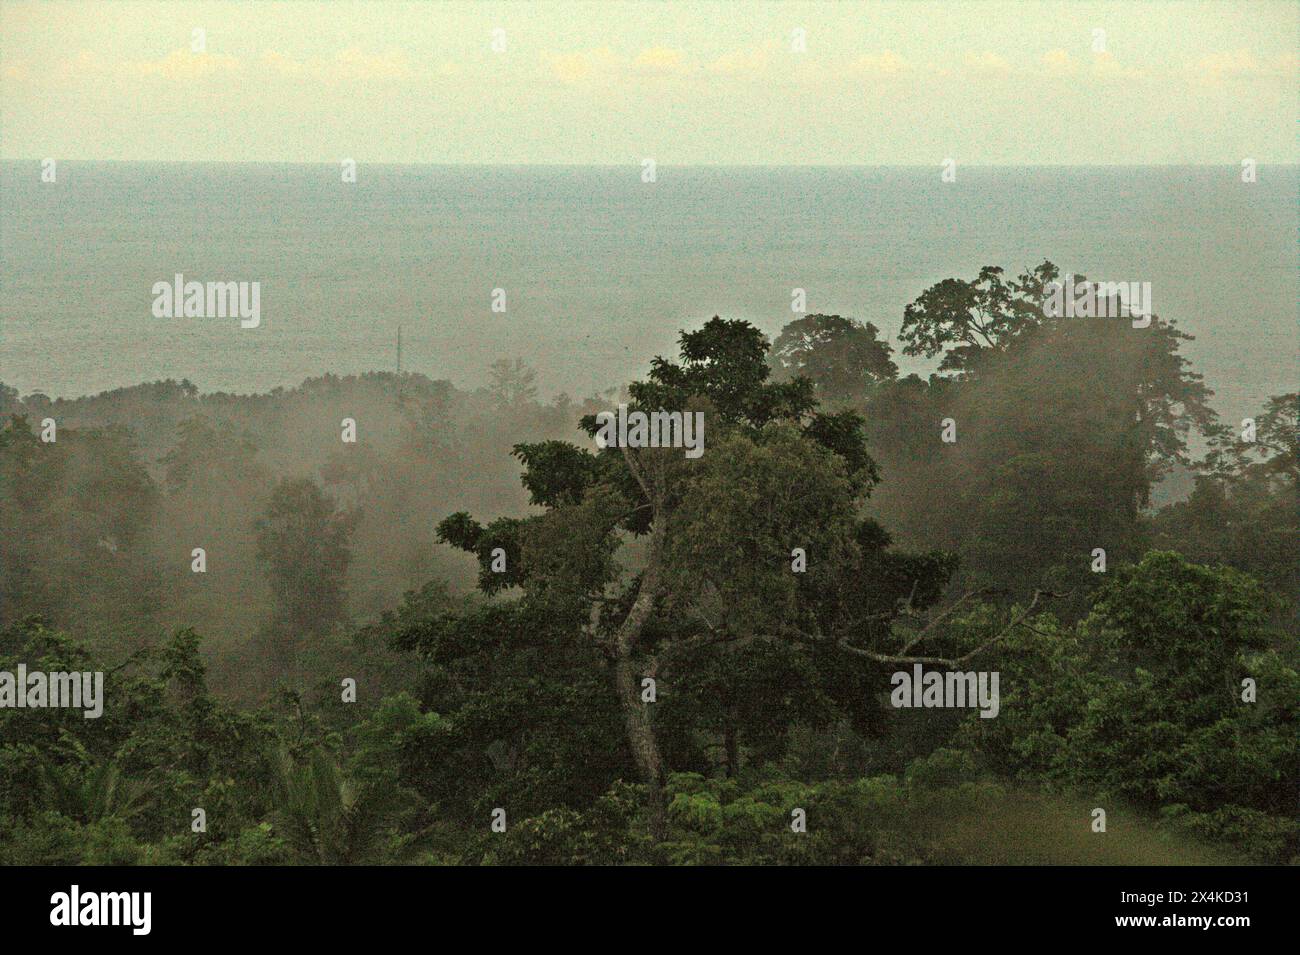 Lowland forest in a background of sea is photographed from a vegetated area near Mount Tangkoko and Mount Duasudara (Dua Saudara) in Bitung, North Sulawesi, Indonesia. Connected to Tangkoko Nature Reserve, this landscape protects biodiversity, but climate change is threatening at an alarming rate. Tangkoko forest currently suffers from temperature increase by up to 0.2 degree Celsius per year, as reported by a team of primatologists led by Marine Joly, with the overall fruit abundance is also decreased. The International Union for Conservation of Nature (IUCN) says that rising temperatures... Stock Photo